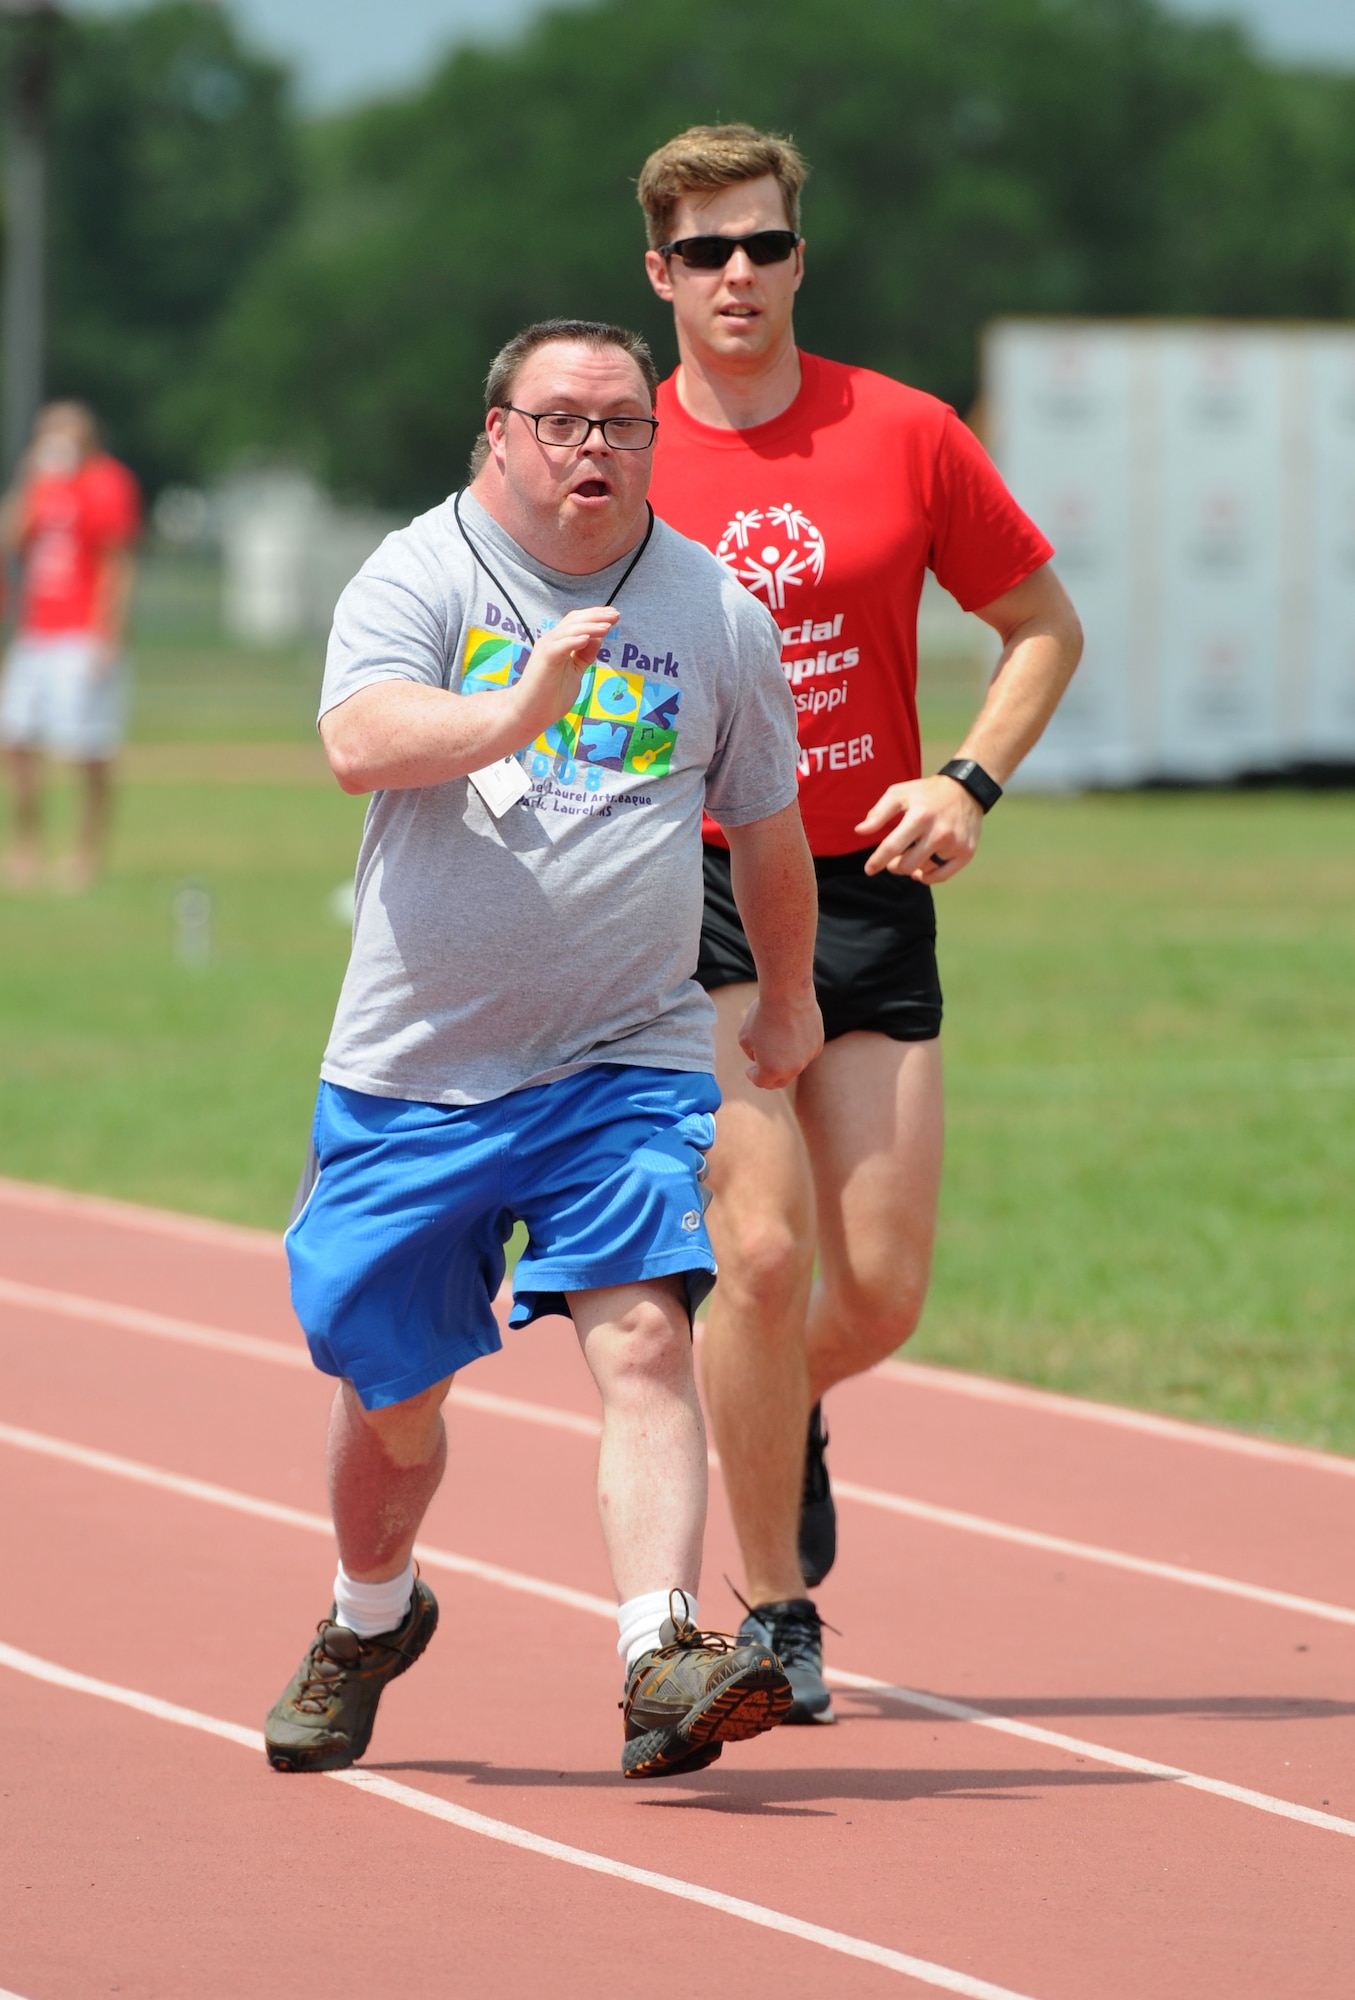 John Toche, Special Olympics athlete, participates in the 100 meter walk with the assistance of Airman 1st Class Joshua Hinson, 335th Training Squadron student, during the Special Olympics Mississippi Summer Games at the triangle track May 21, 2016, Keesler Air Force Base, Miss. More than 700 athletes and 3,000 volunteers worked together to hold competitions throughout the day. This is the 30th year Keesler has hosted the state Special Olympics.  (U.S. Air Force photo by Kemberly Groue)